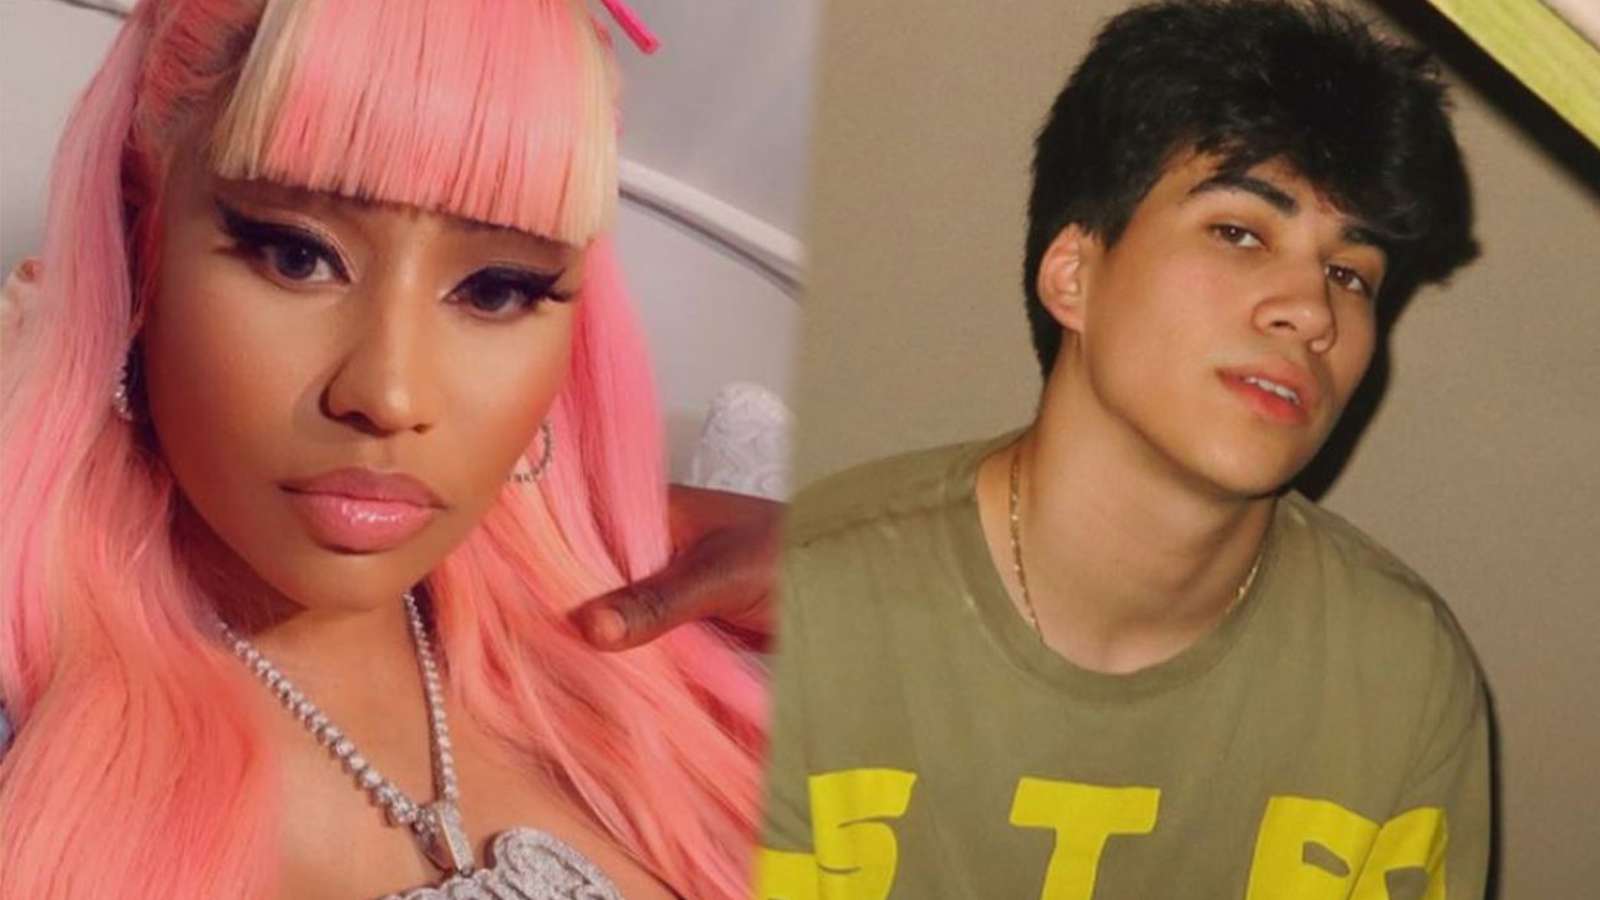 Mattia doxxed by Nicki Minaj fans after baby shaming comments